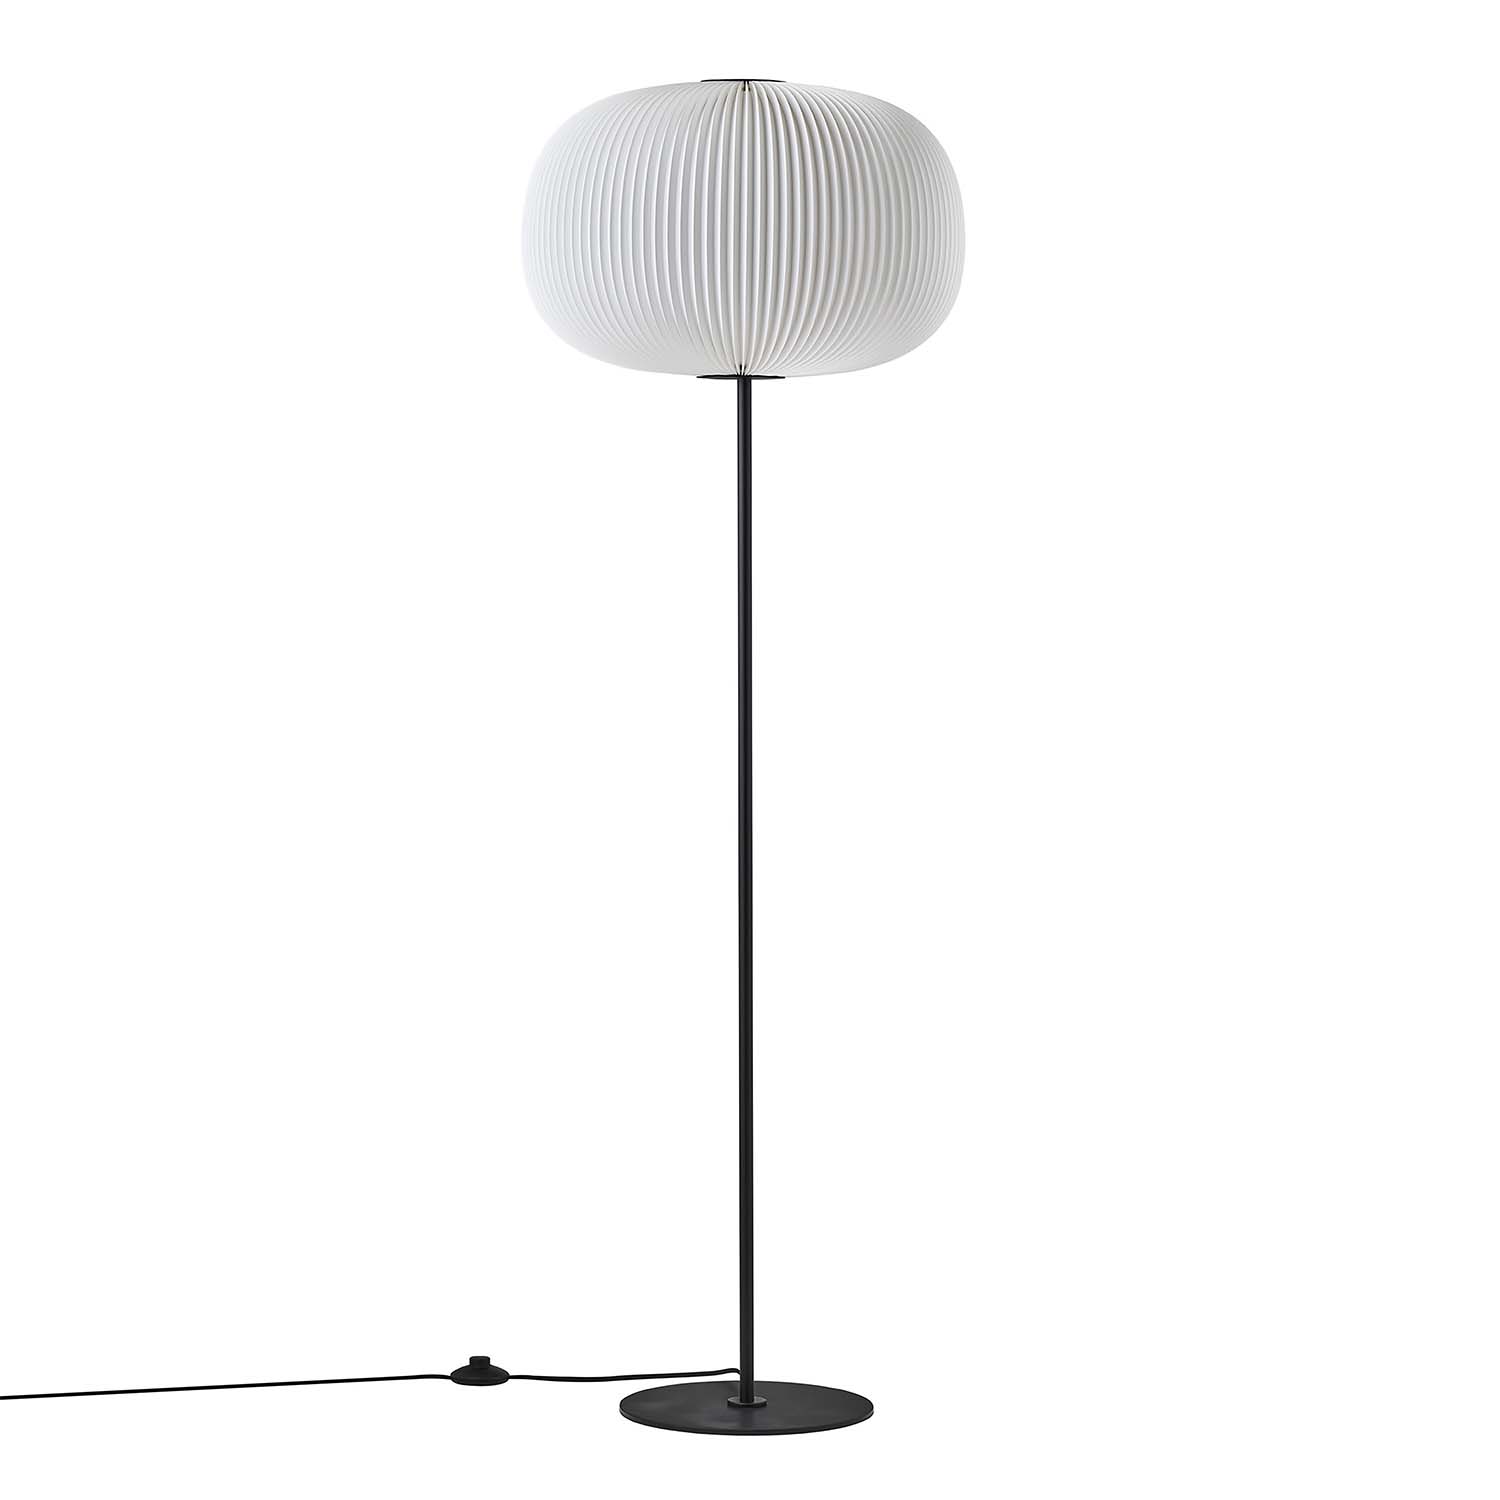 LAMELLA - Handcrafted white pleated paper floor lamp